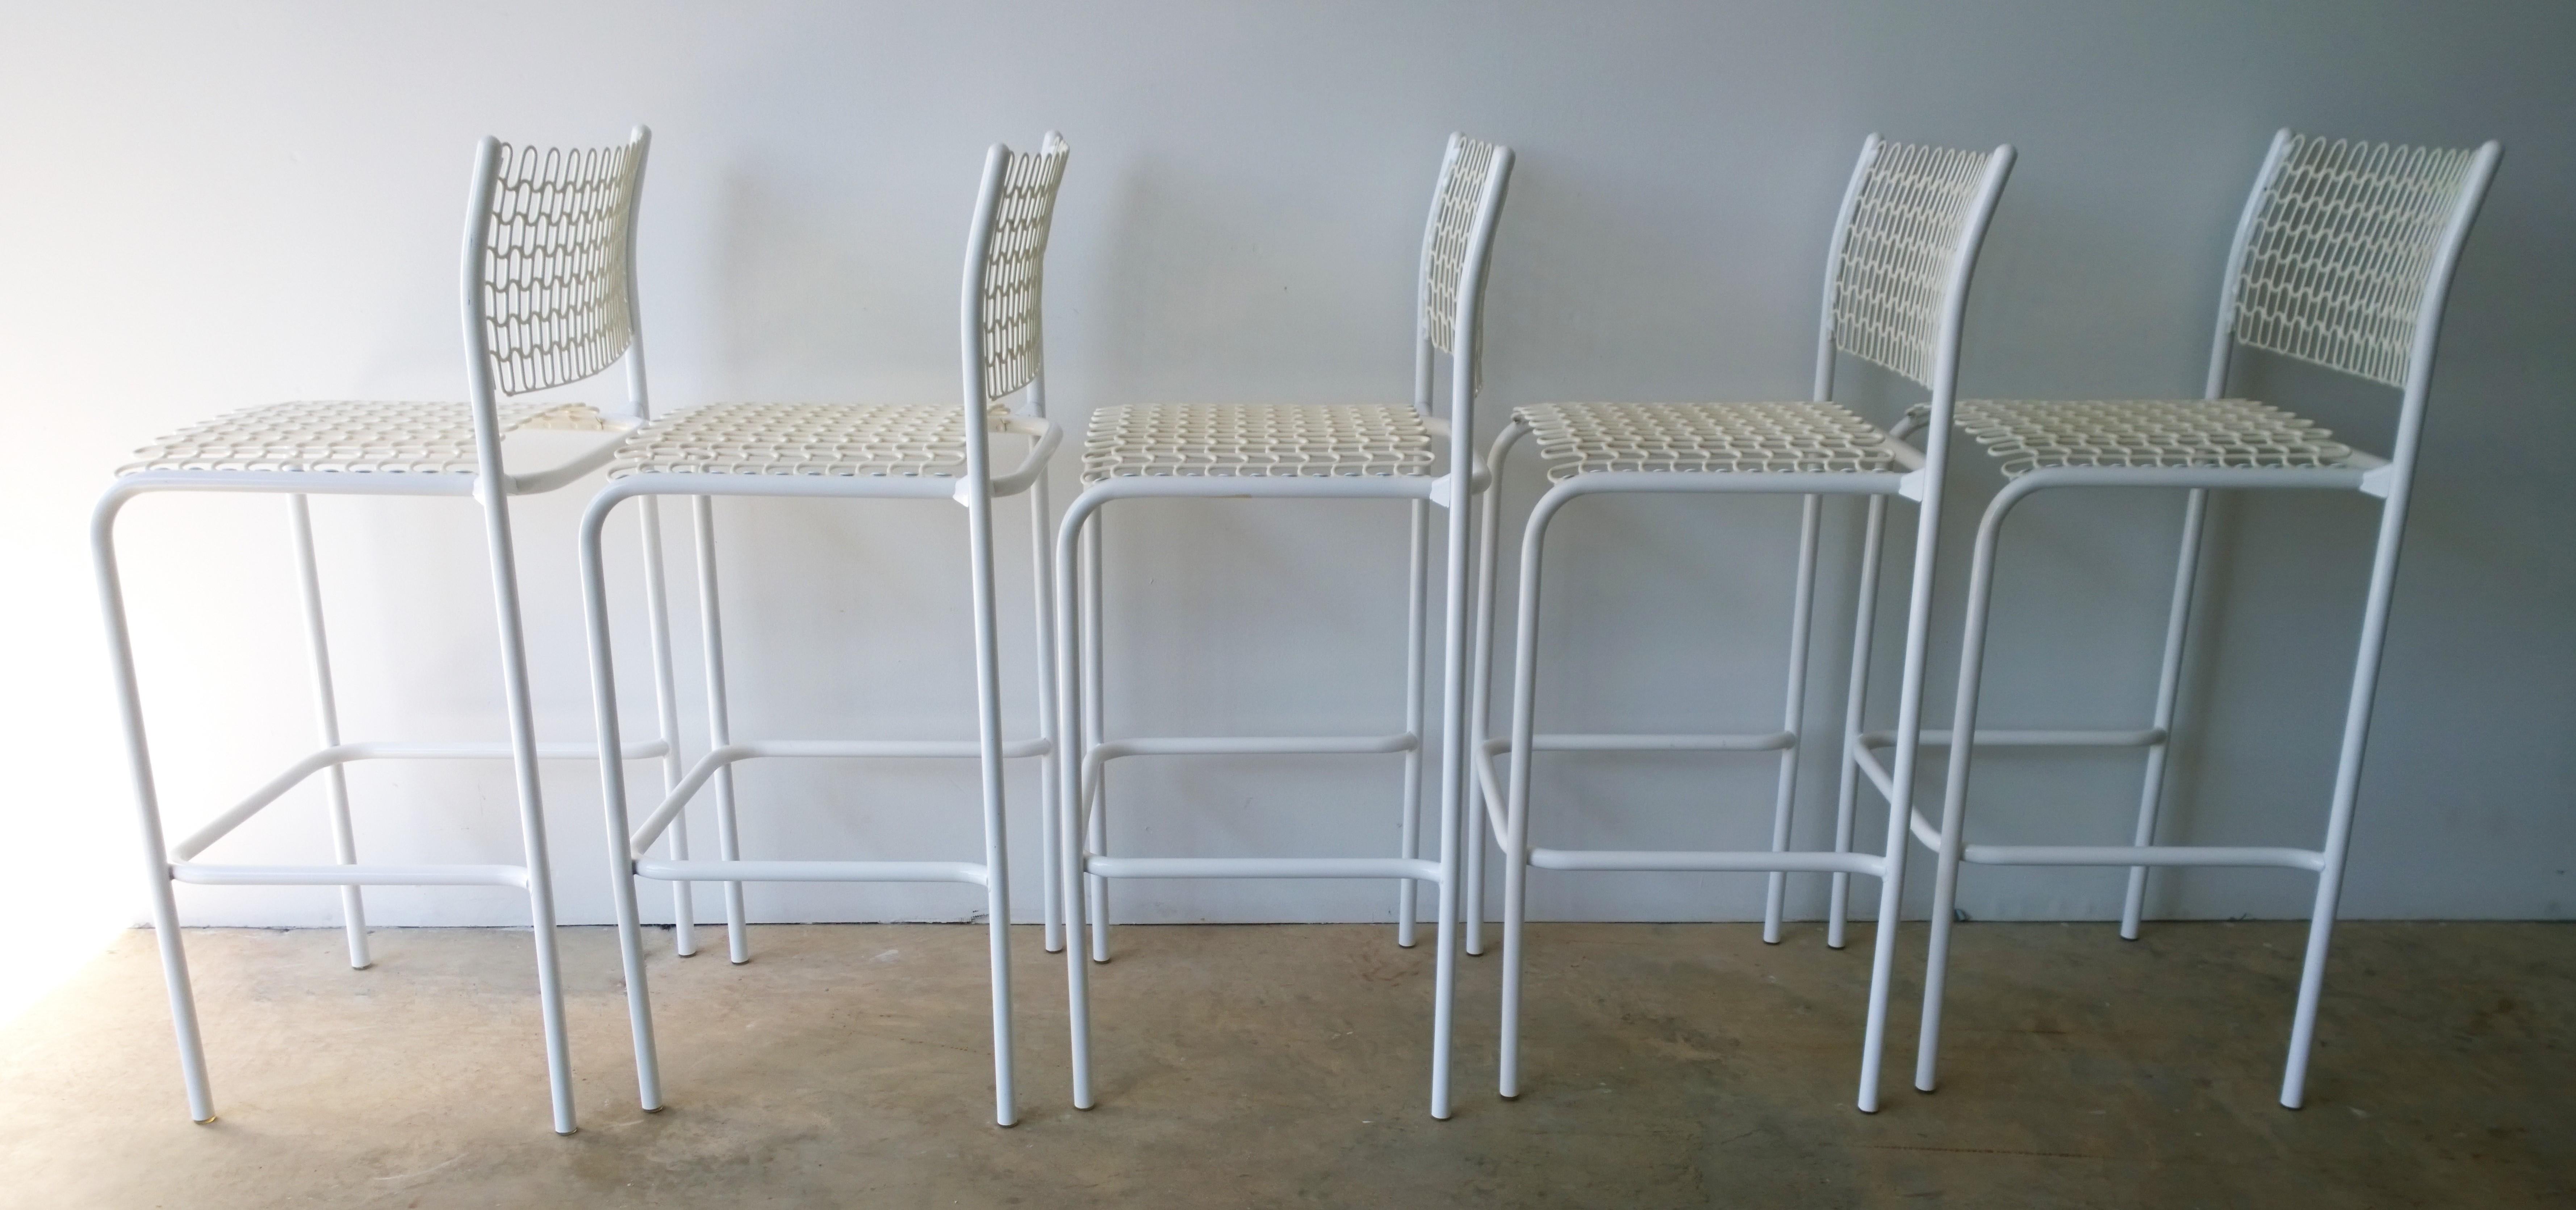 Offered are a set of five Mid-Century Modern Sof-tek white patio indoor or outdoor bar stools designed by David Rowland for Thonet. These bar stools feature a rubber mesh seat and an enameled in white tubular chrome frame that make them look and